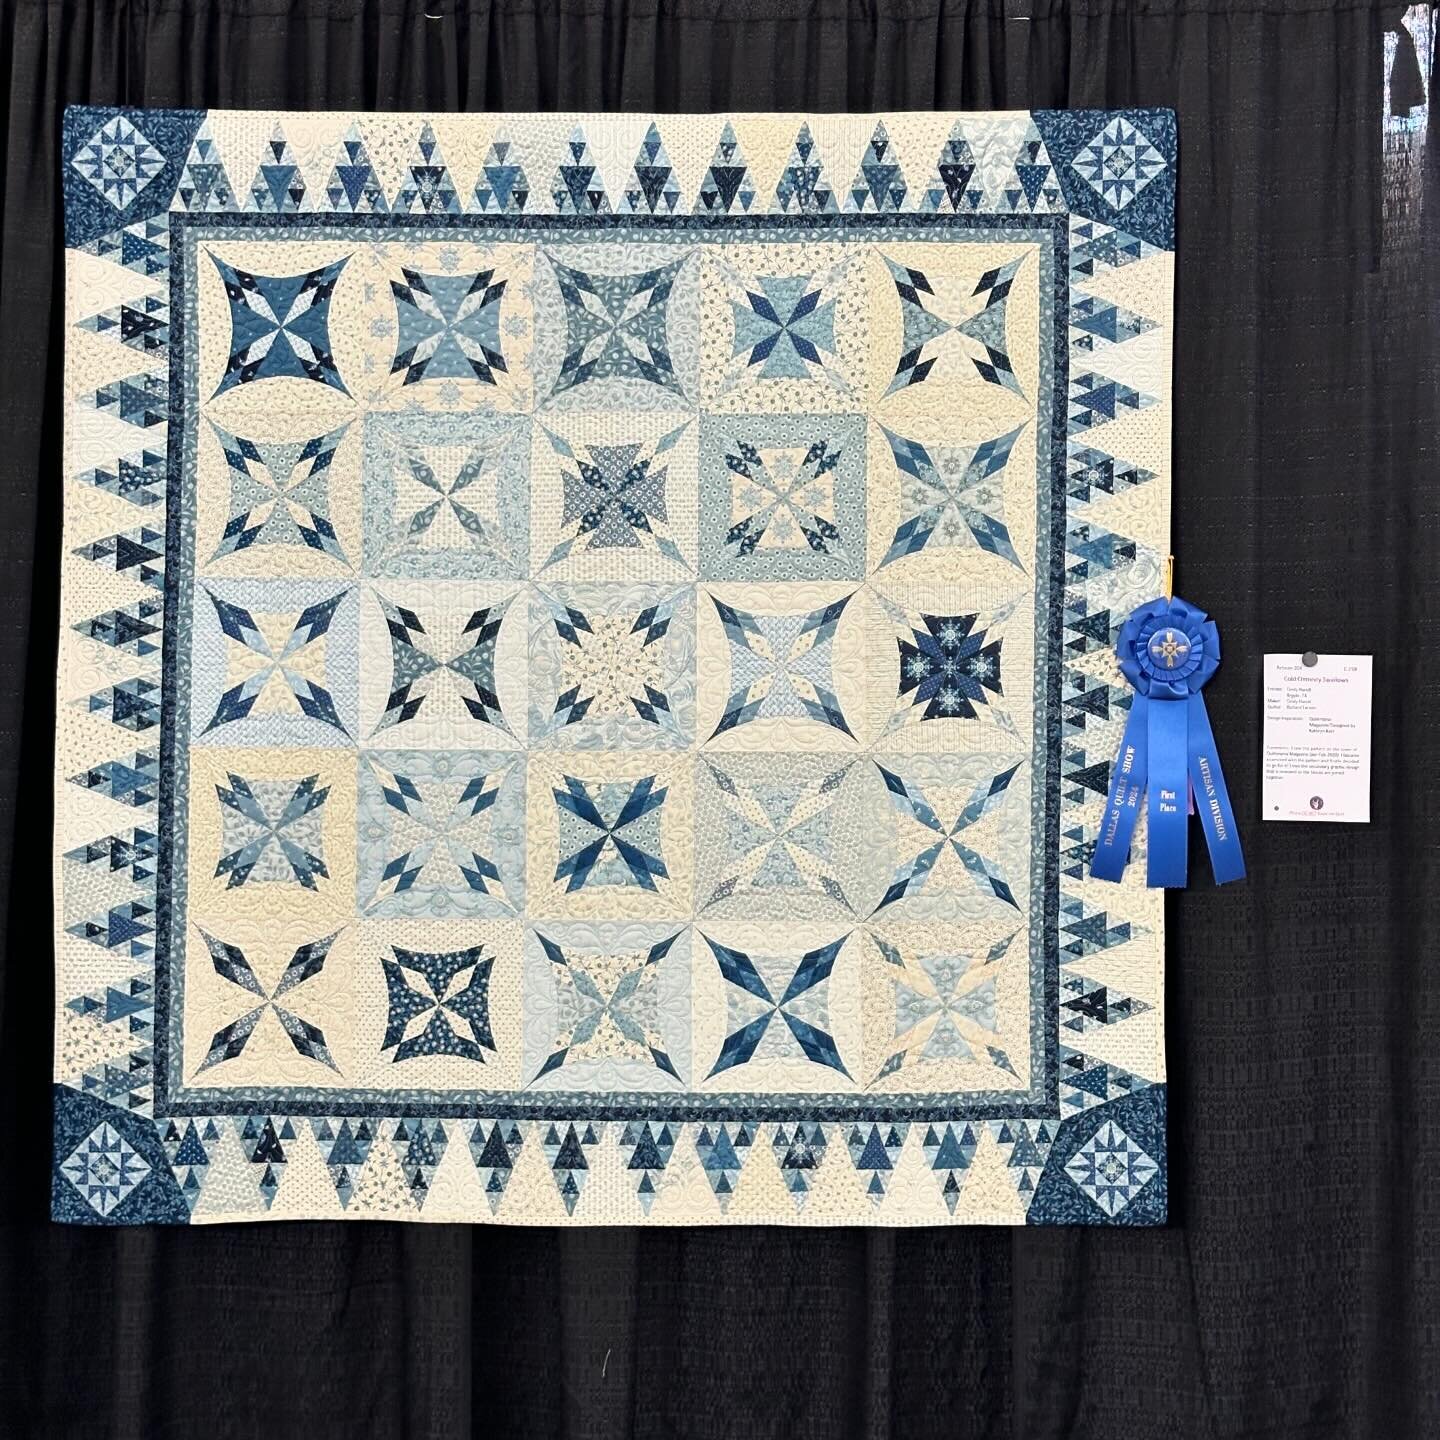 Download number 3 of 1st, 2nd, &amp; 3rd place ribboned competition quilts, in no particular order, from the @quiltersguildofdallas #dallasquiltshow . I made an effort to include the card with information about the quilt and the maker, but sorry, man